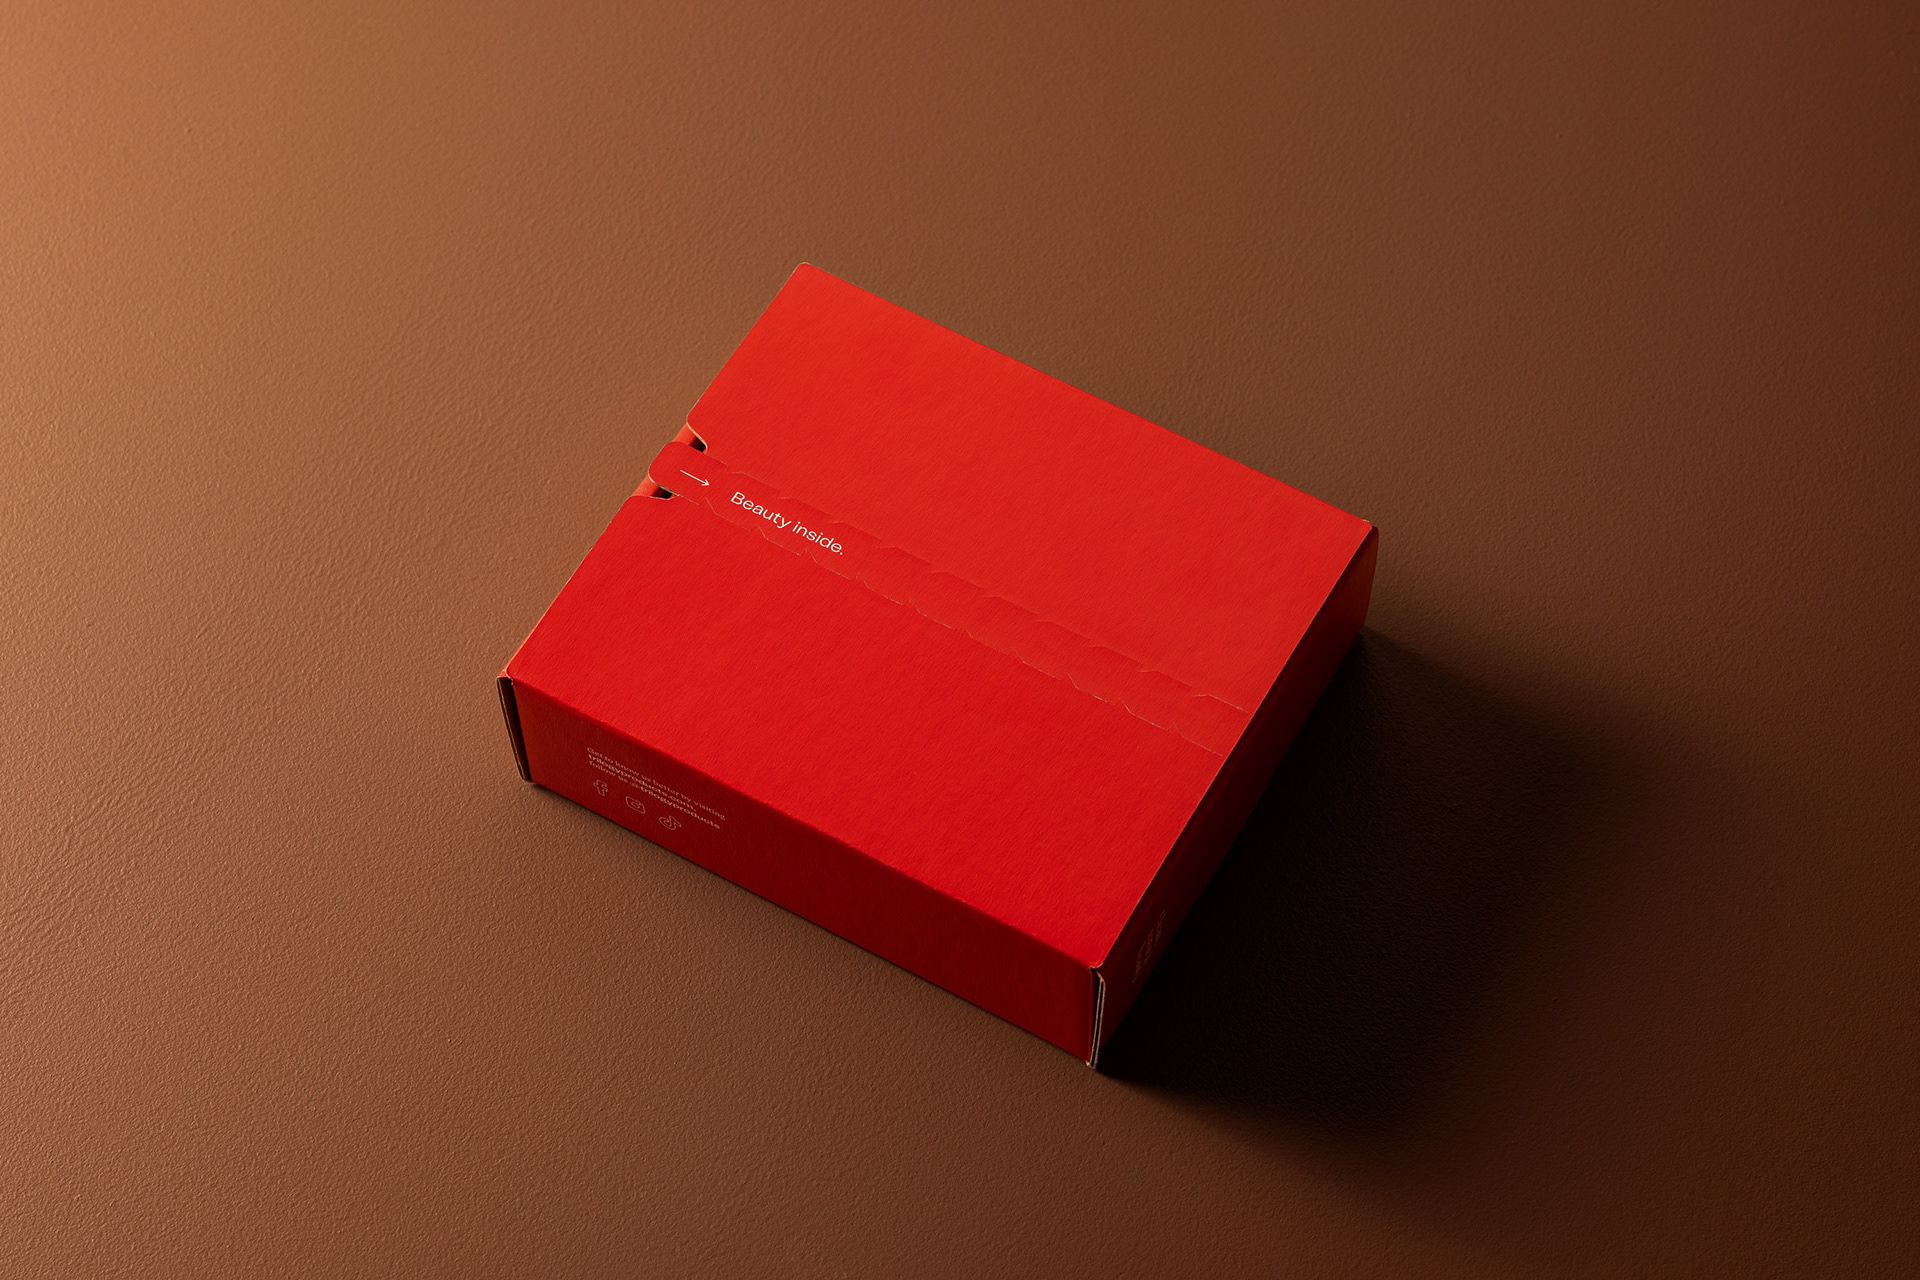 Sealed red box for Trilgoy Beauty Products on a brown backdrop